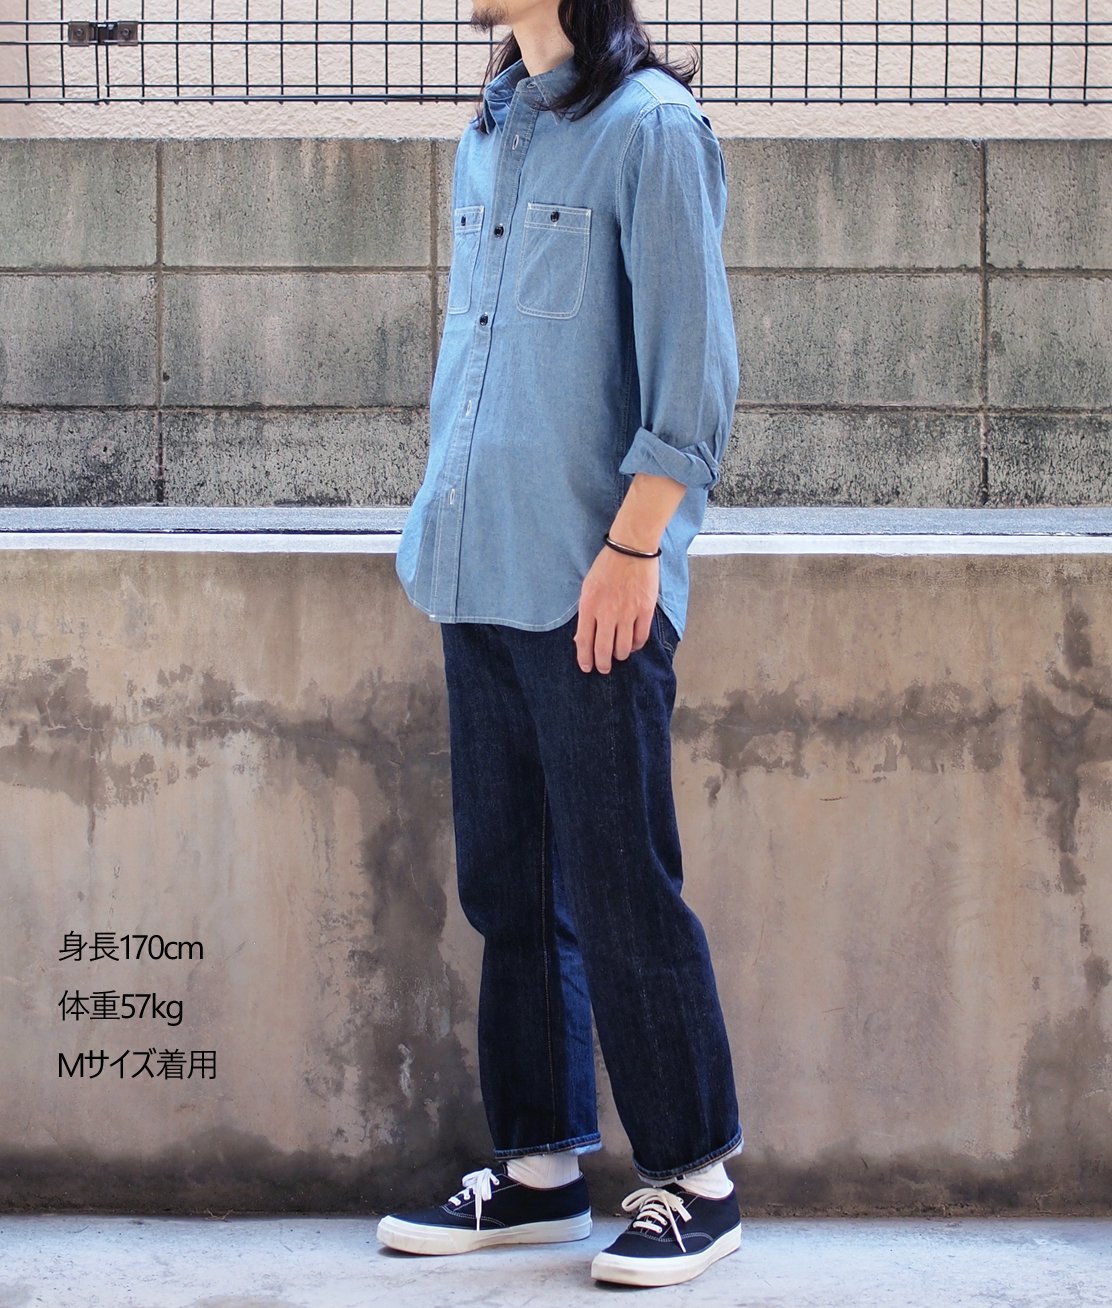 FIVE BROTHER】CHAMBRAY WORK SHIRT - BLUE シャンブレーワークシャツ